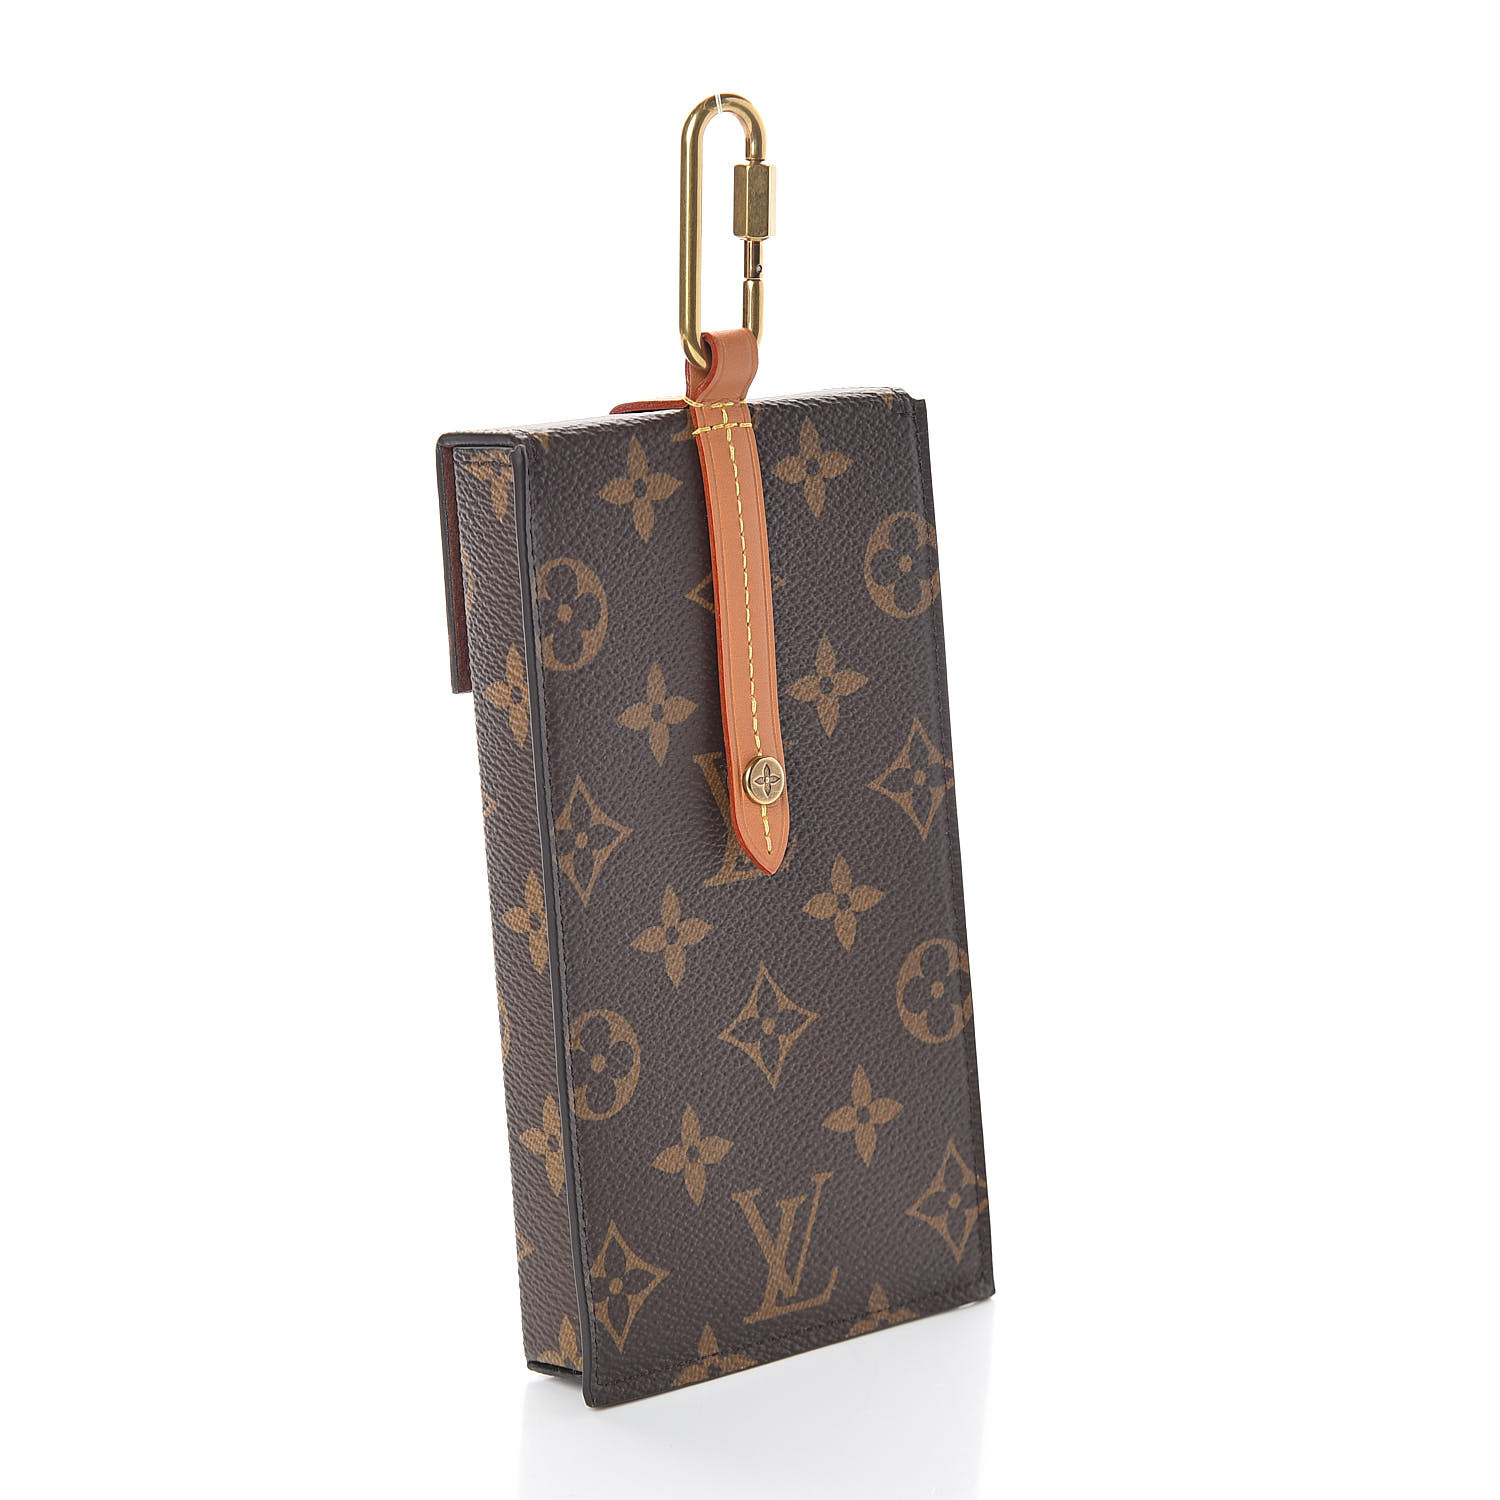 Sold at Auction: AUTHENTIC LOUIS VUITTON DAUPHINE COSMETIC POUCH